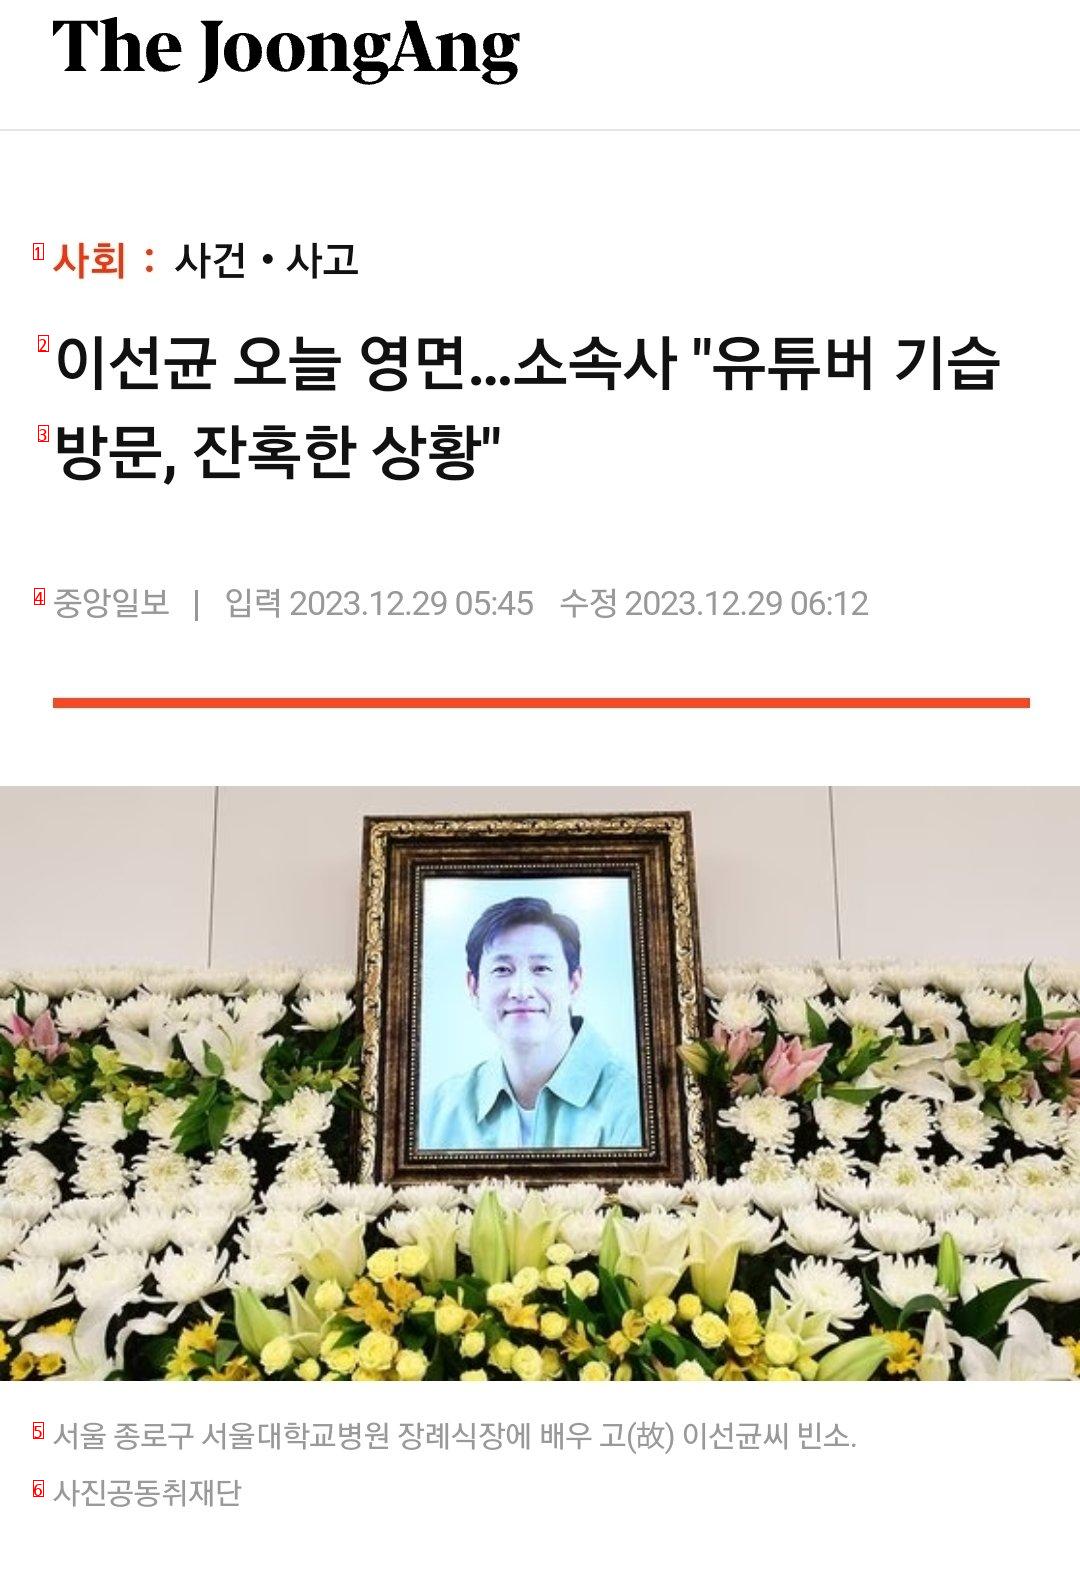 YouTubers are breaking into Lee Sun-kyun's private funeral